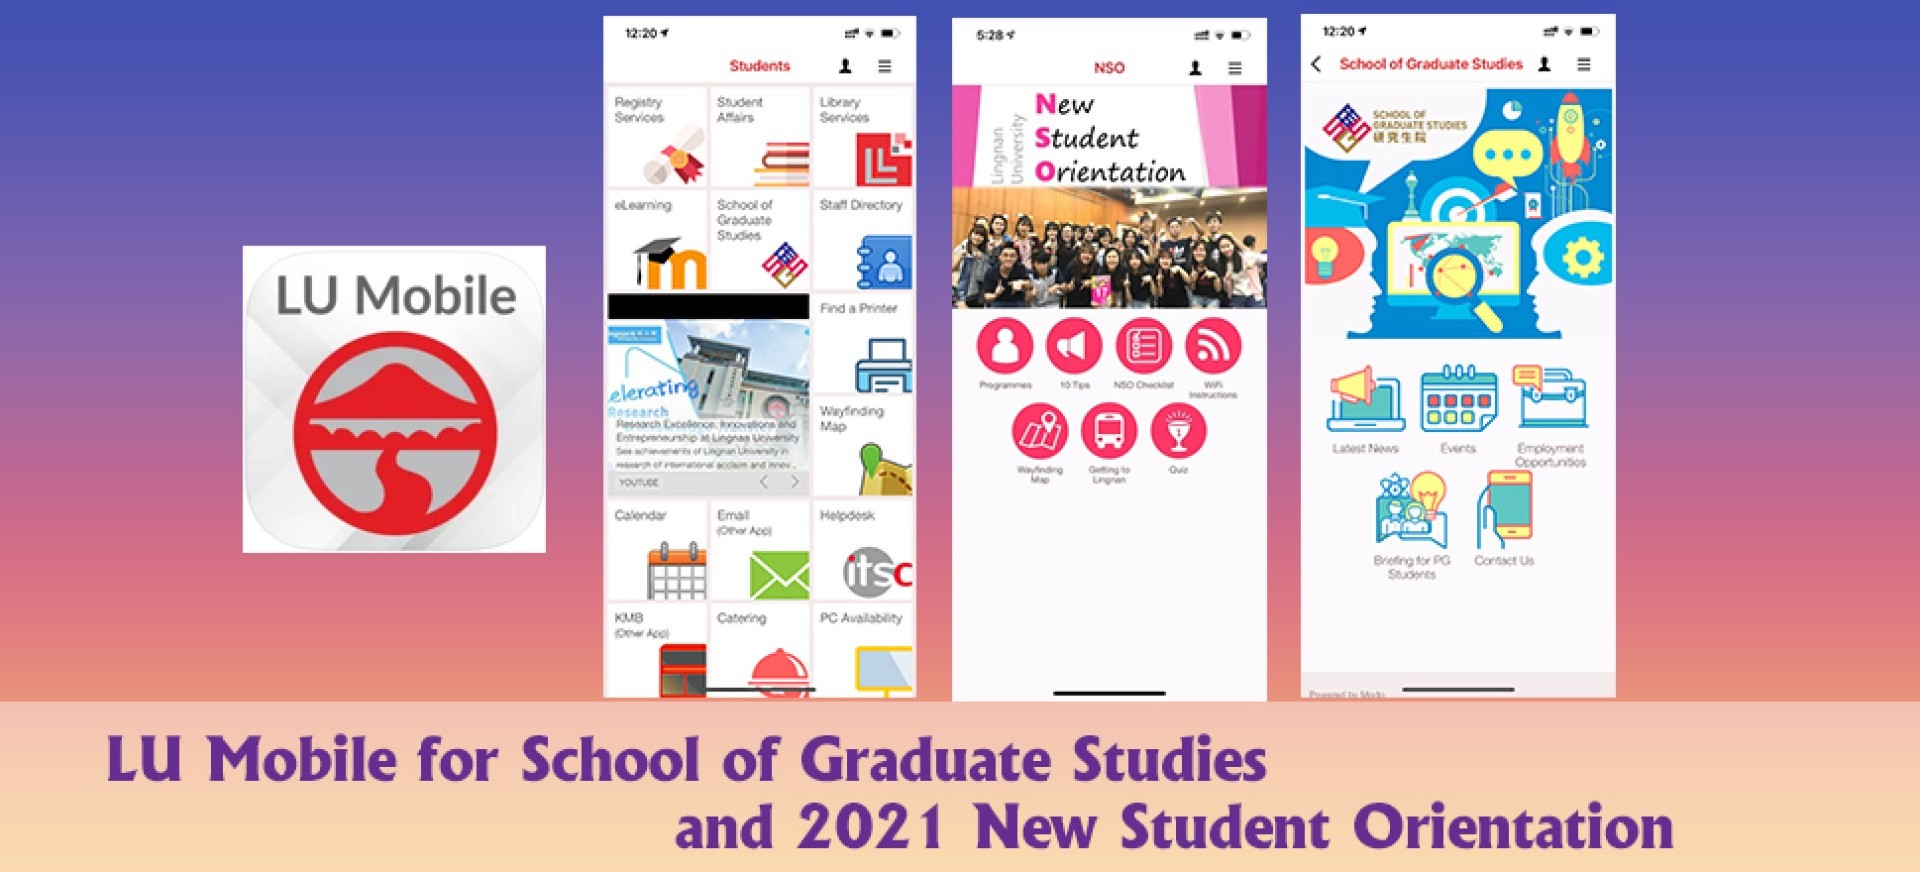 LU Mobile for School of Graduate Studies and 2021 New Student Orientation